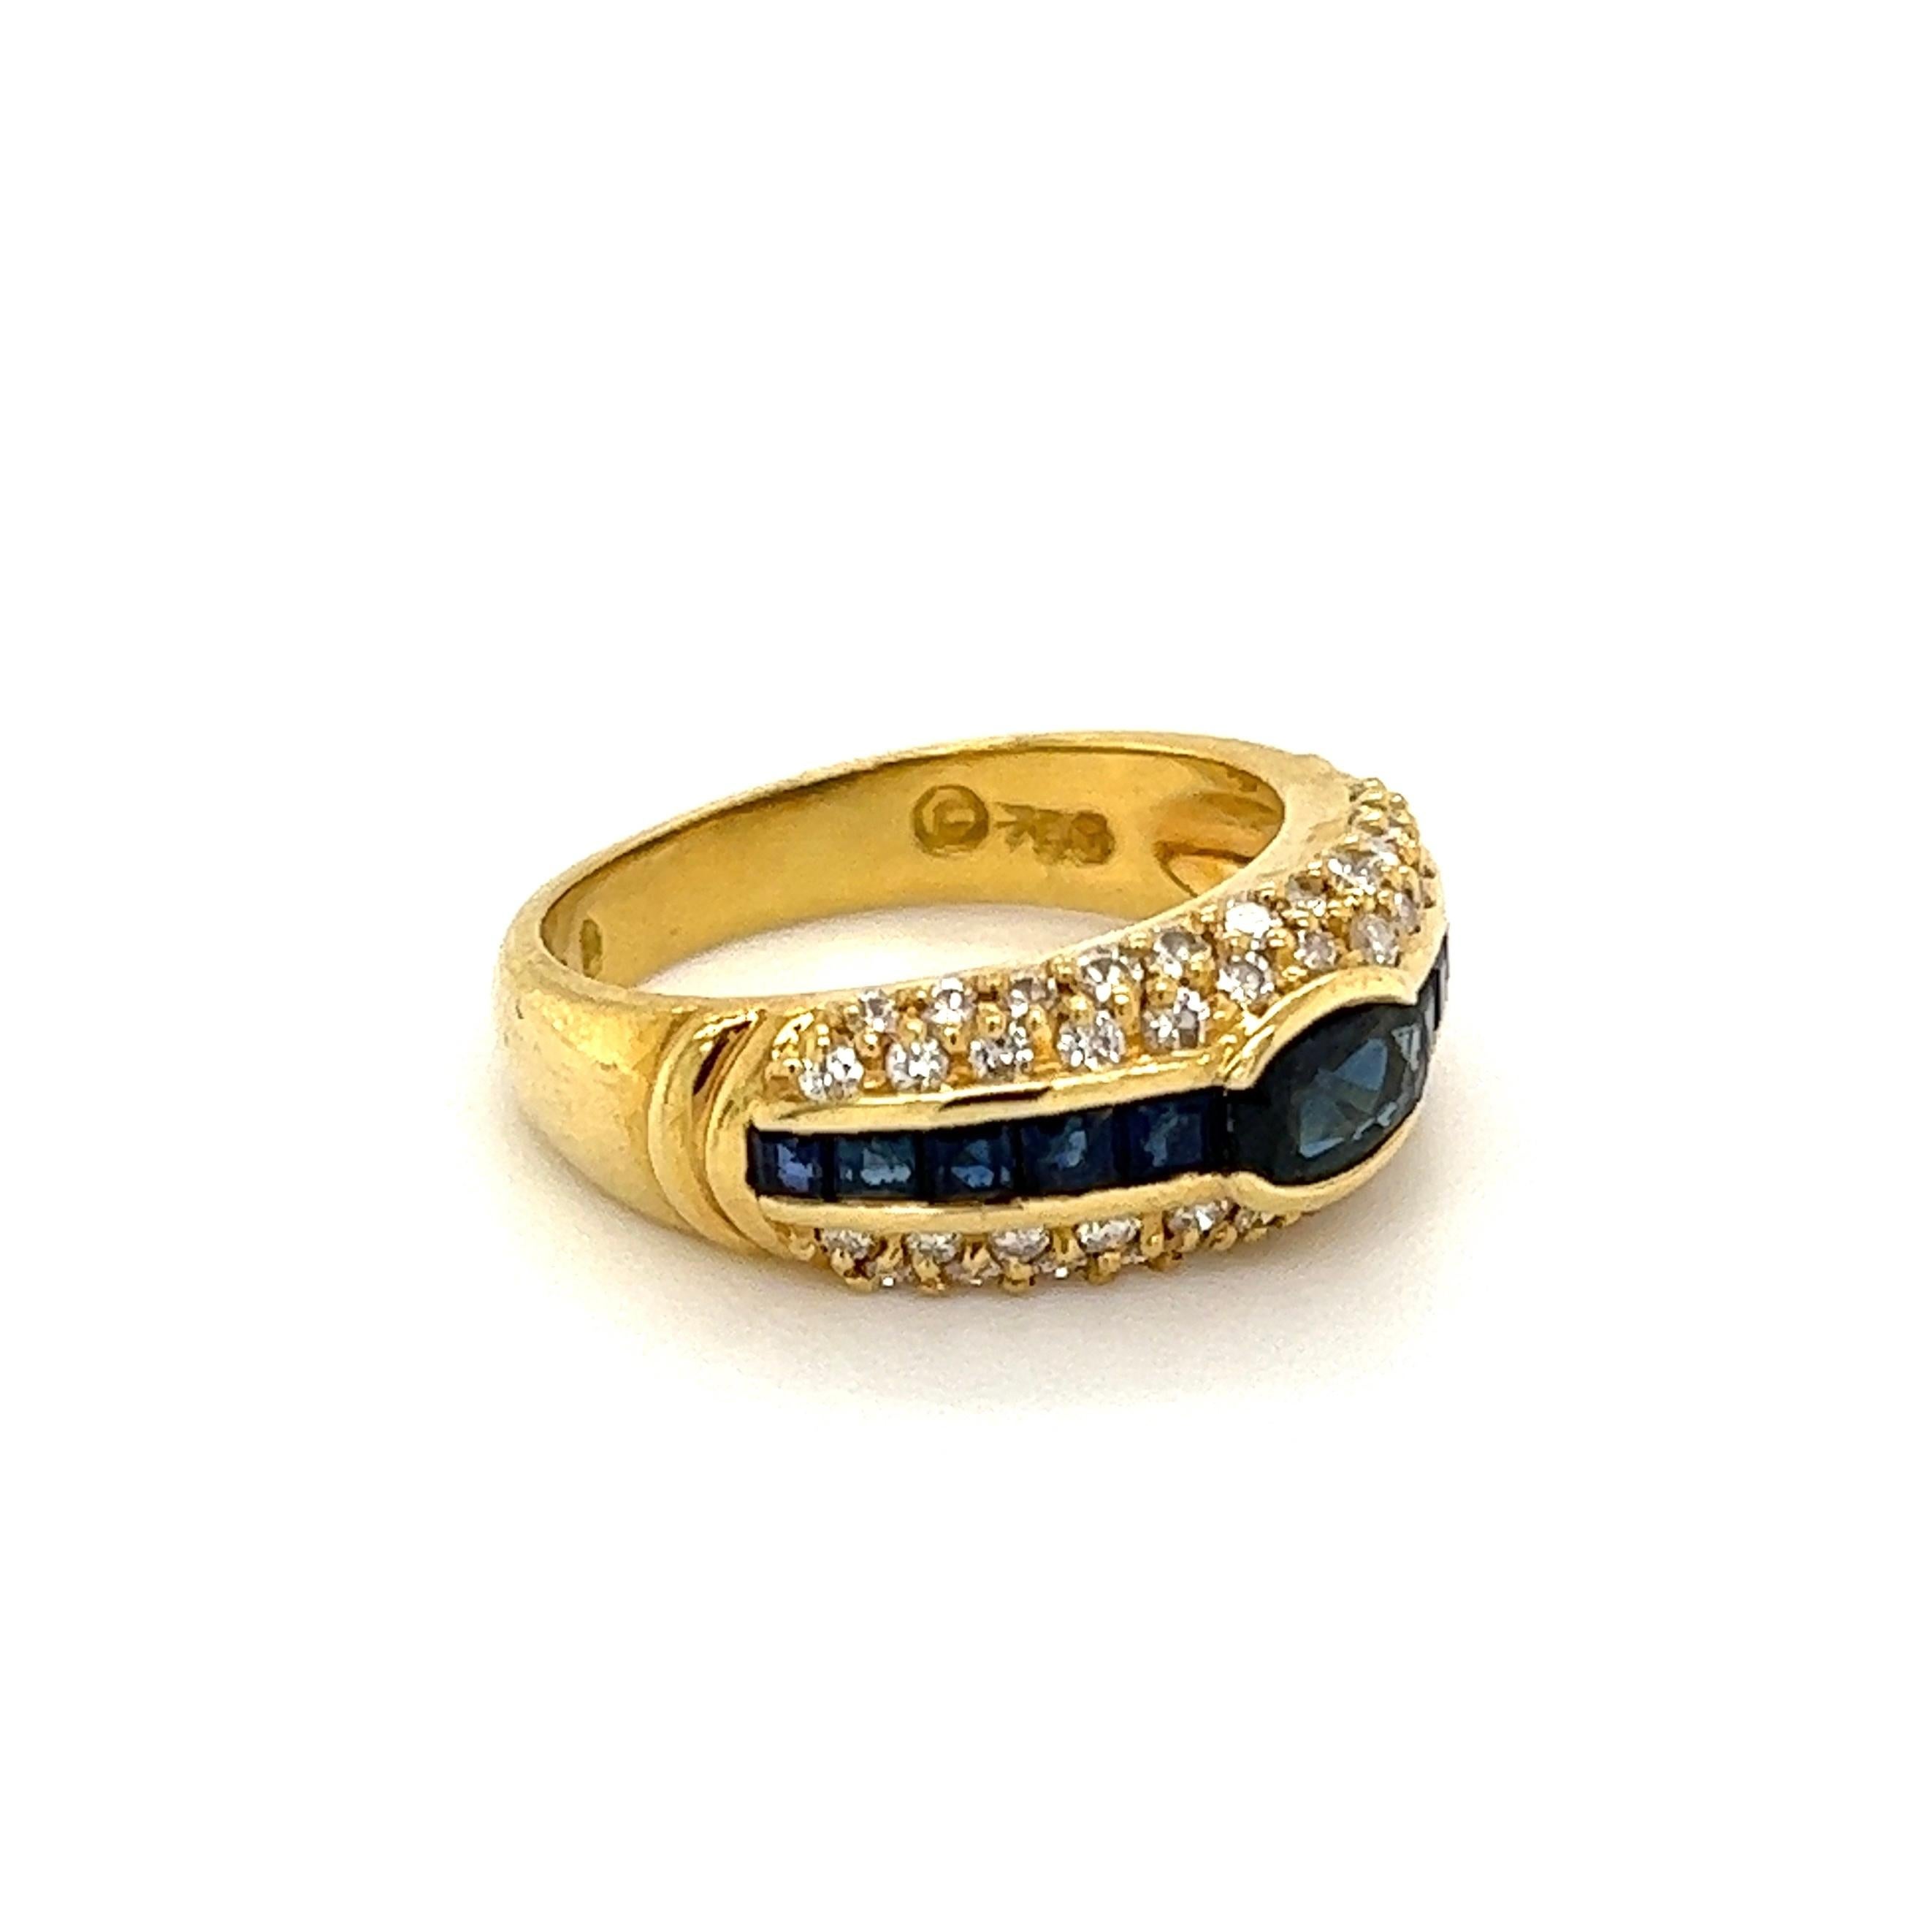 Beautiful and Stylish Sapphire and Diamond Gold Band Ring. Center securely Hand set with Sapphires, weighing approx. 1.1tcw, surrounded by Diamonds weighing approx. 0.31tcw. Hand crafted in 18K Yellow Gold. Measuring approx. 0.87” l x 0.73” w x